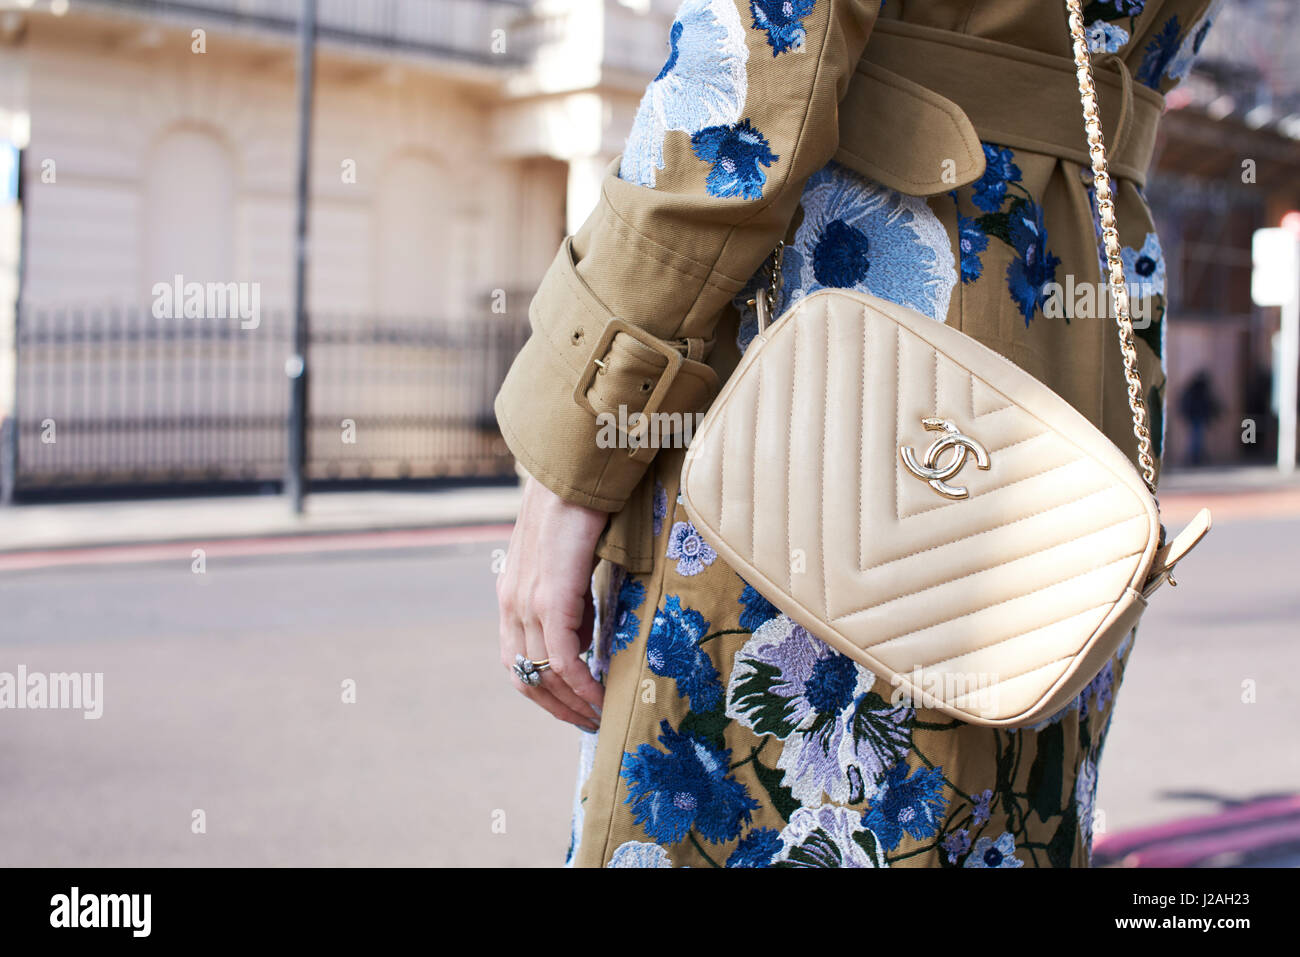 Woman poses for photographers before Fendi show with Chanel bag, Milan  fashion week – Stock Editorial Photo © AndreaA. #85817302